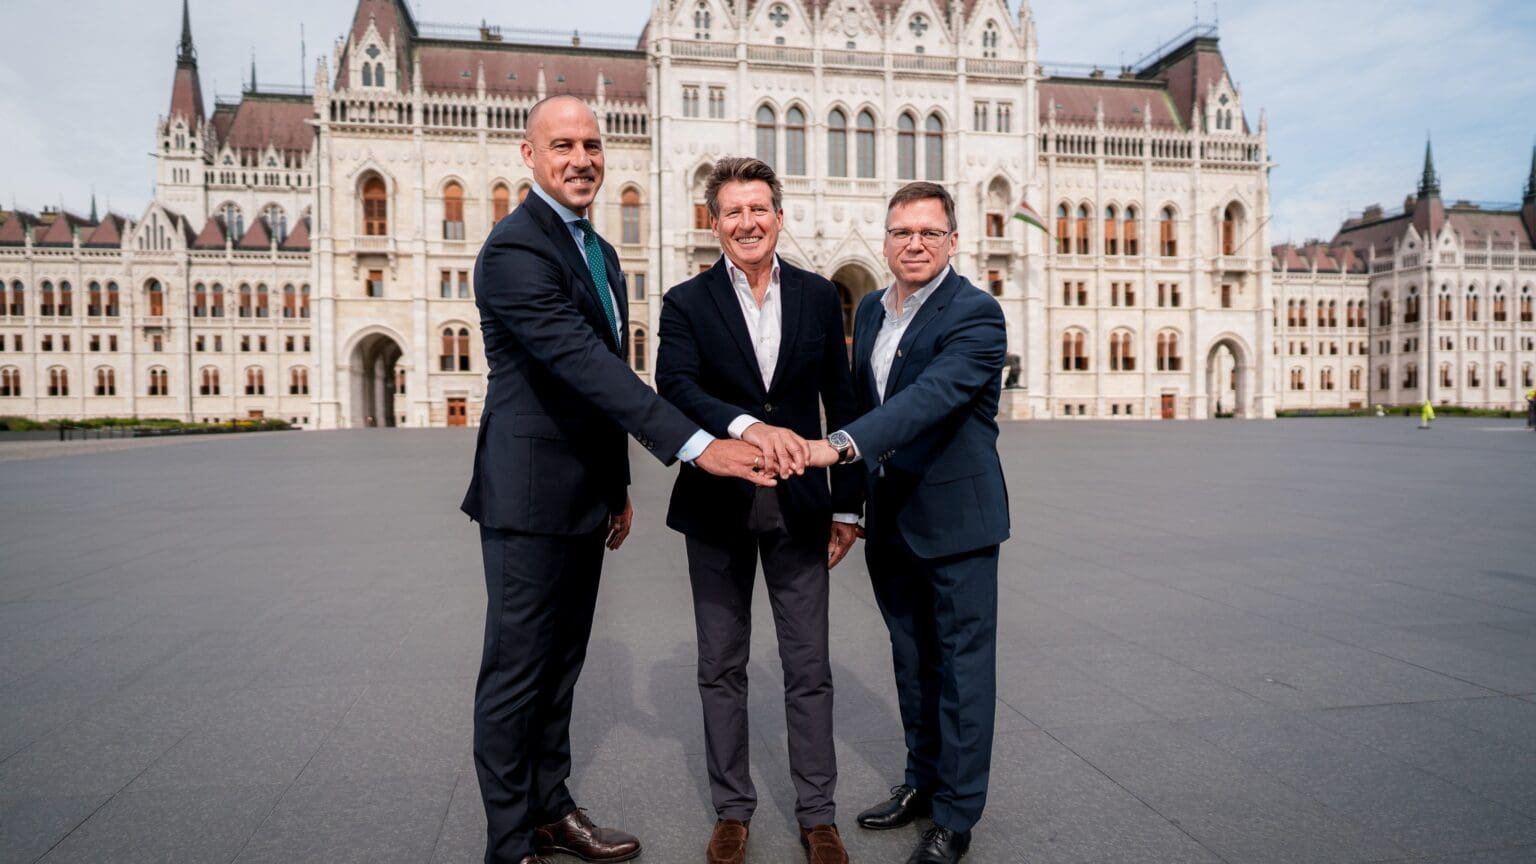 Budapest to Host First-Ever World Athletics Ultimate Championship in 2026